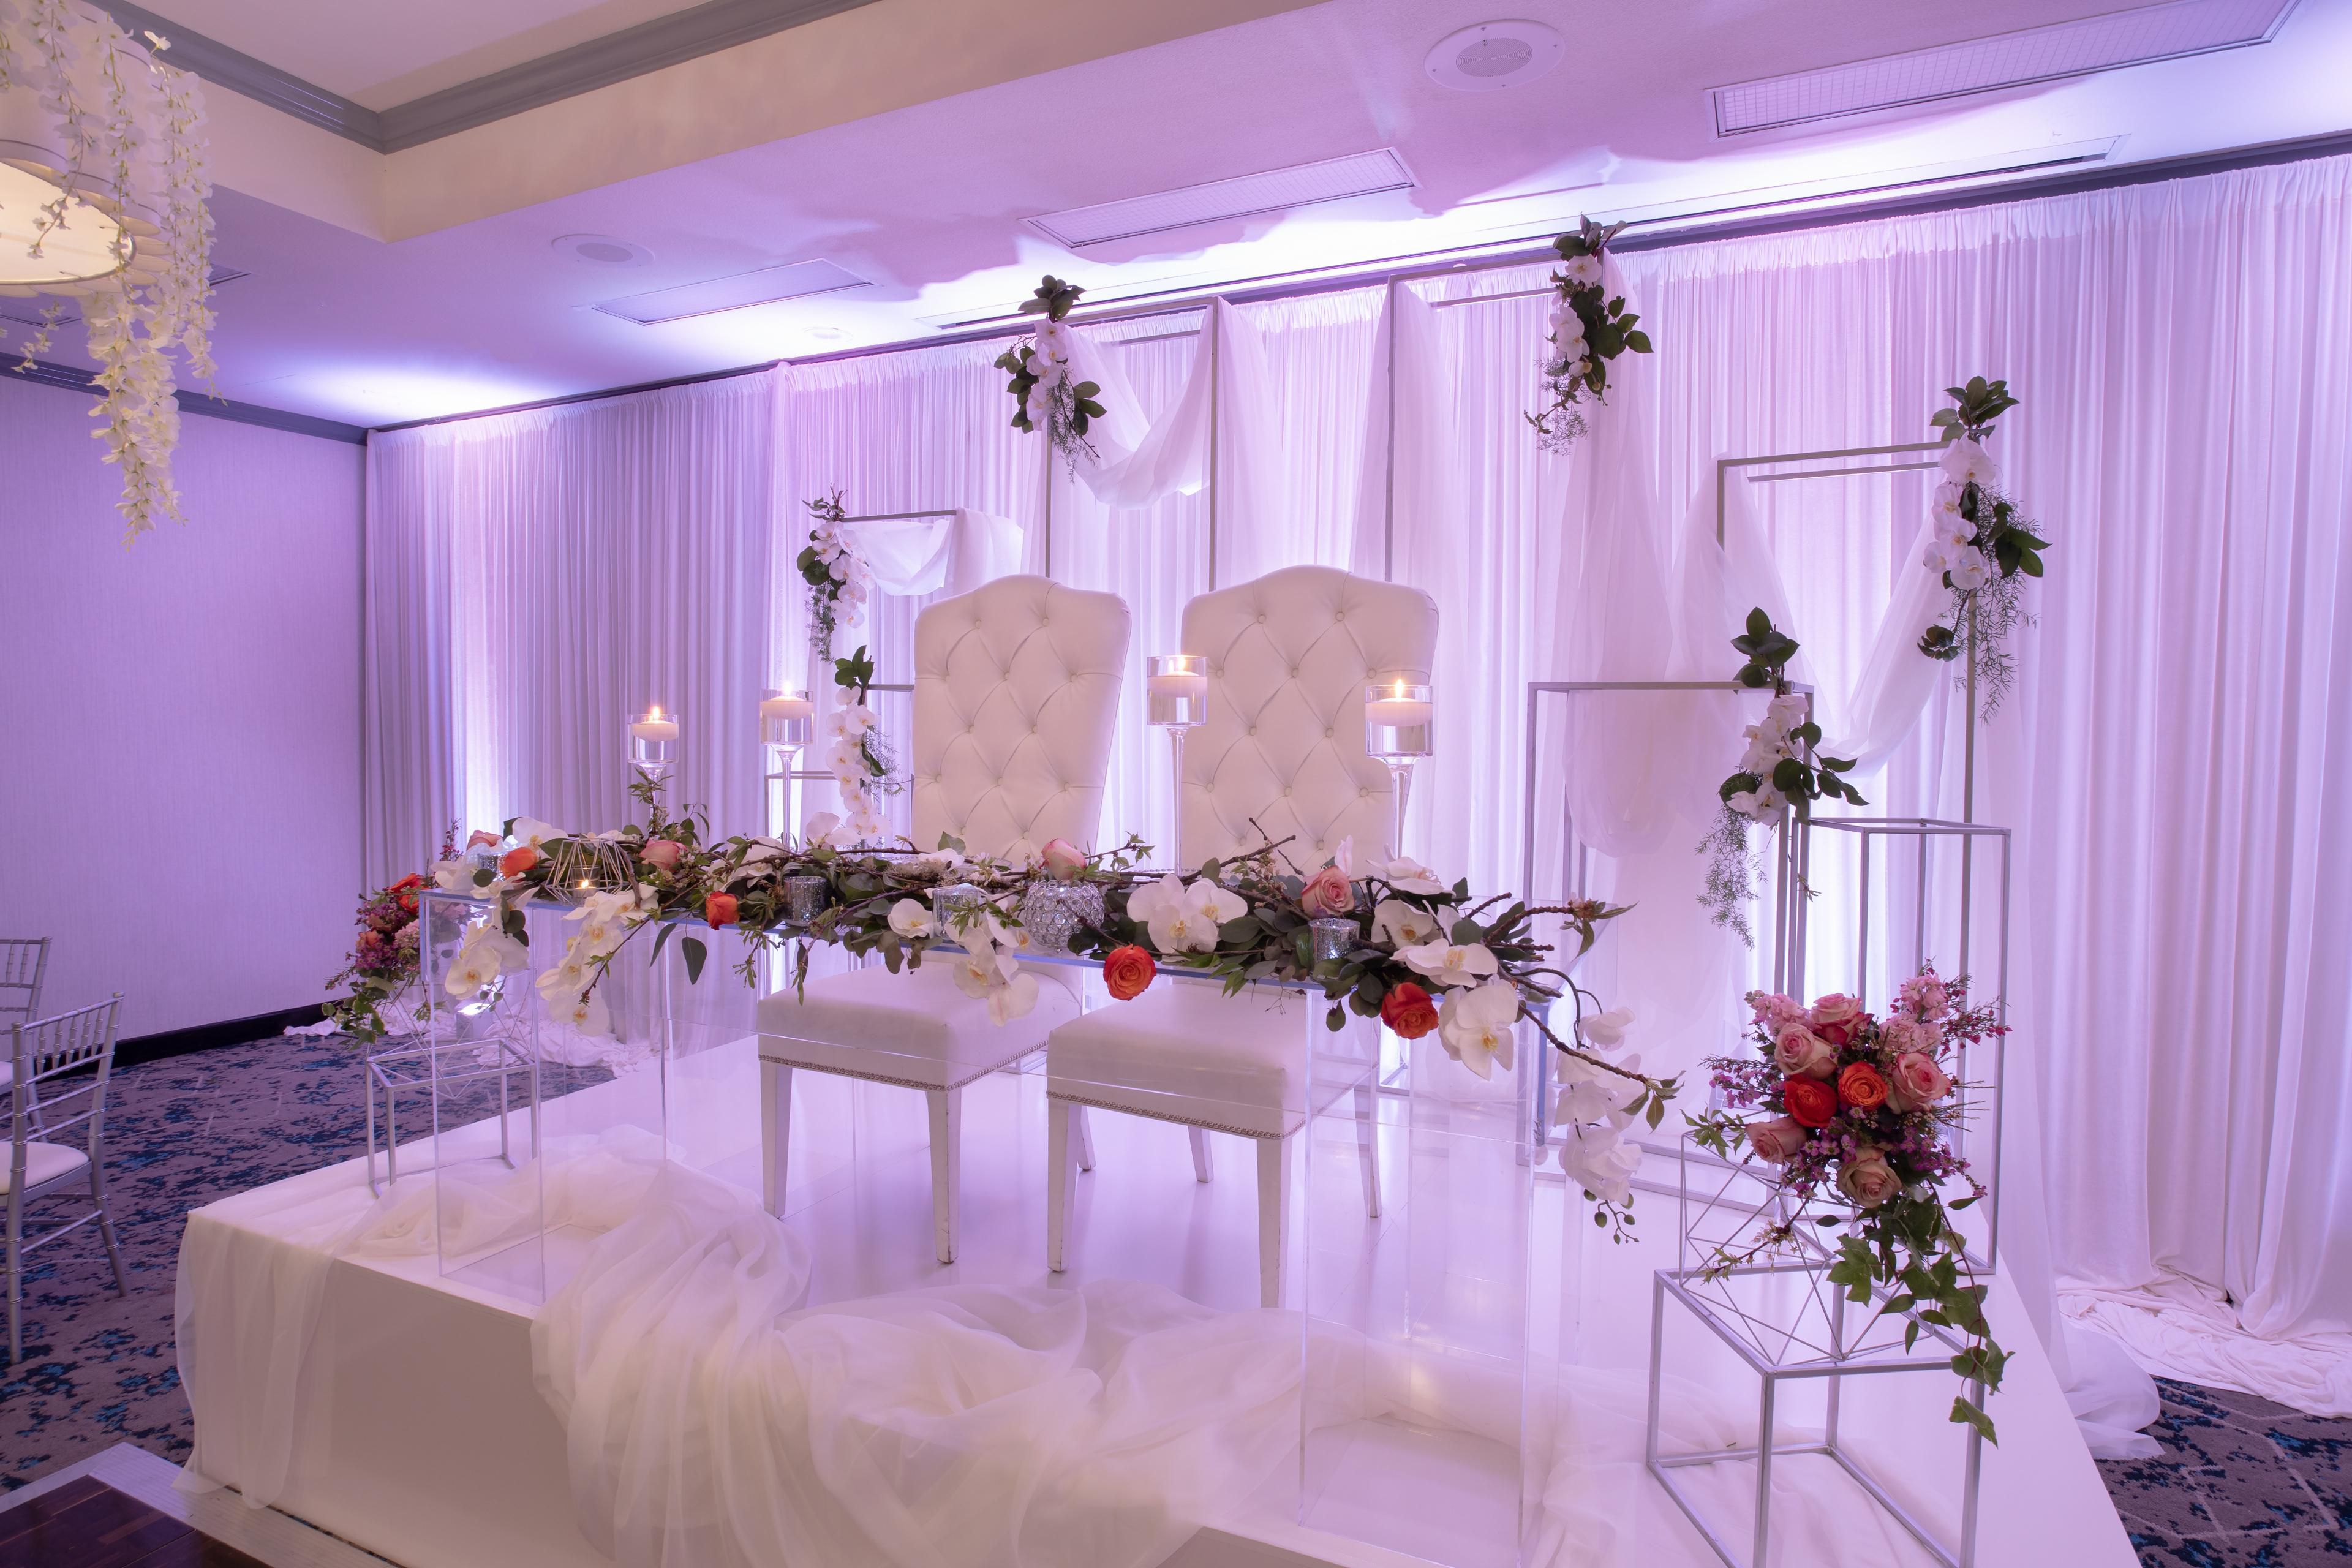 Special occasions are well celebrated in our event spaces.